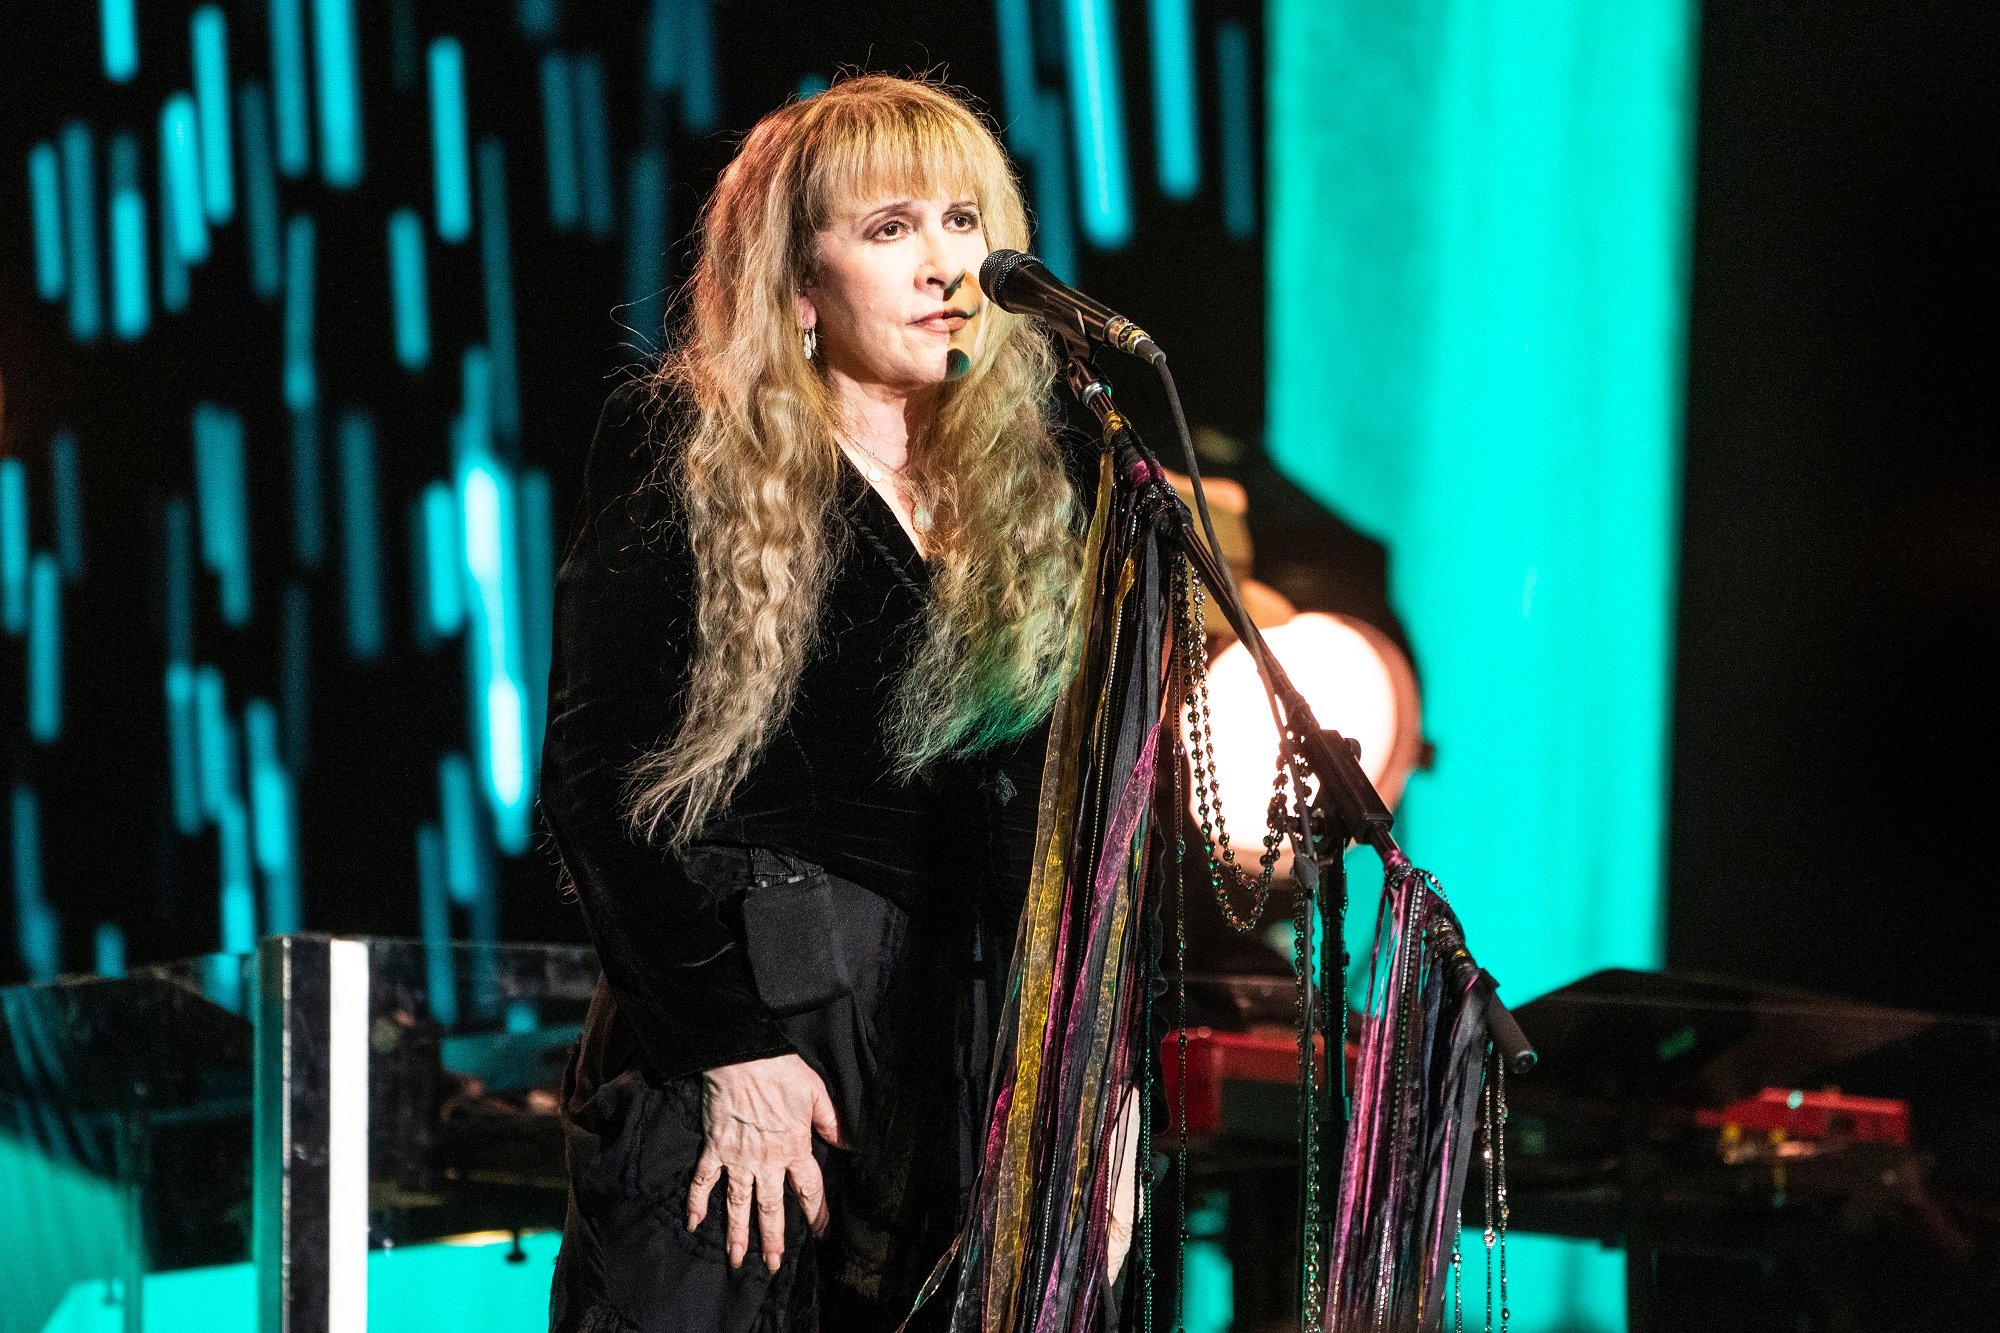 Stevie Nicks stands on stage in front of a mic stand while wearing a long-sleeved black dress